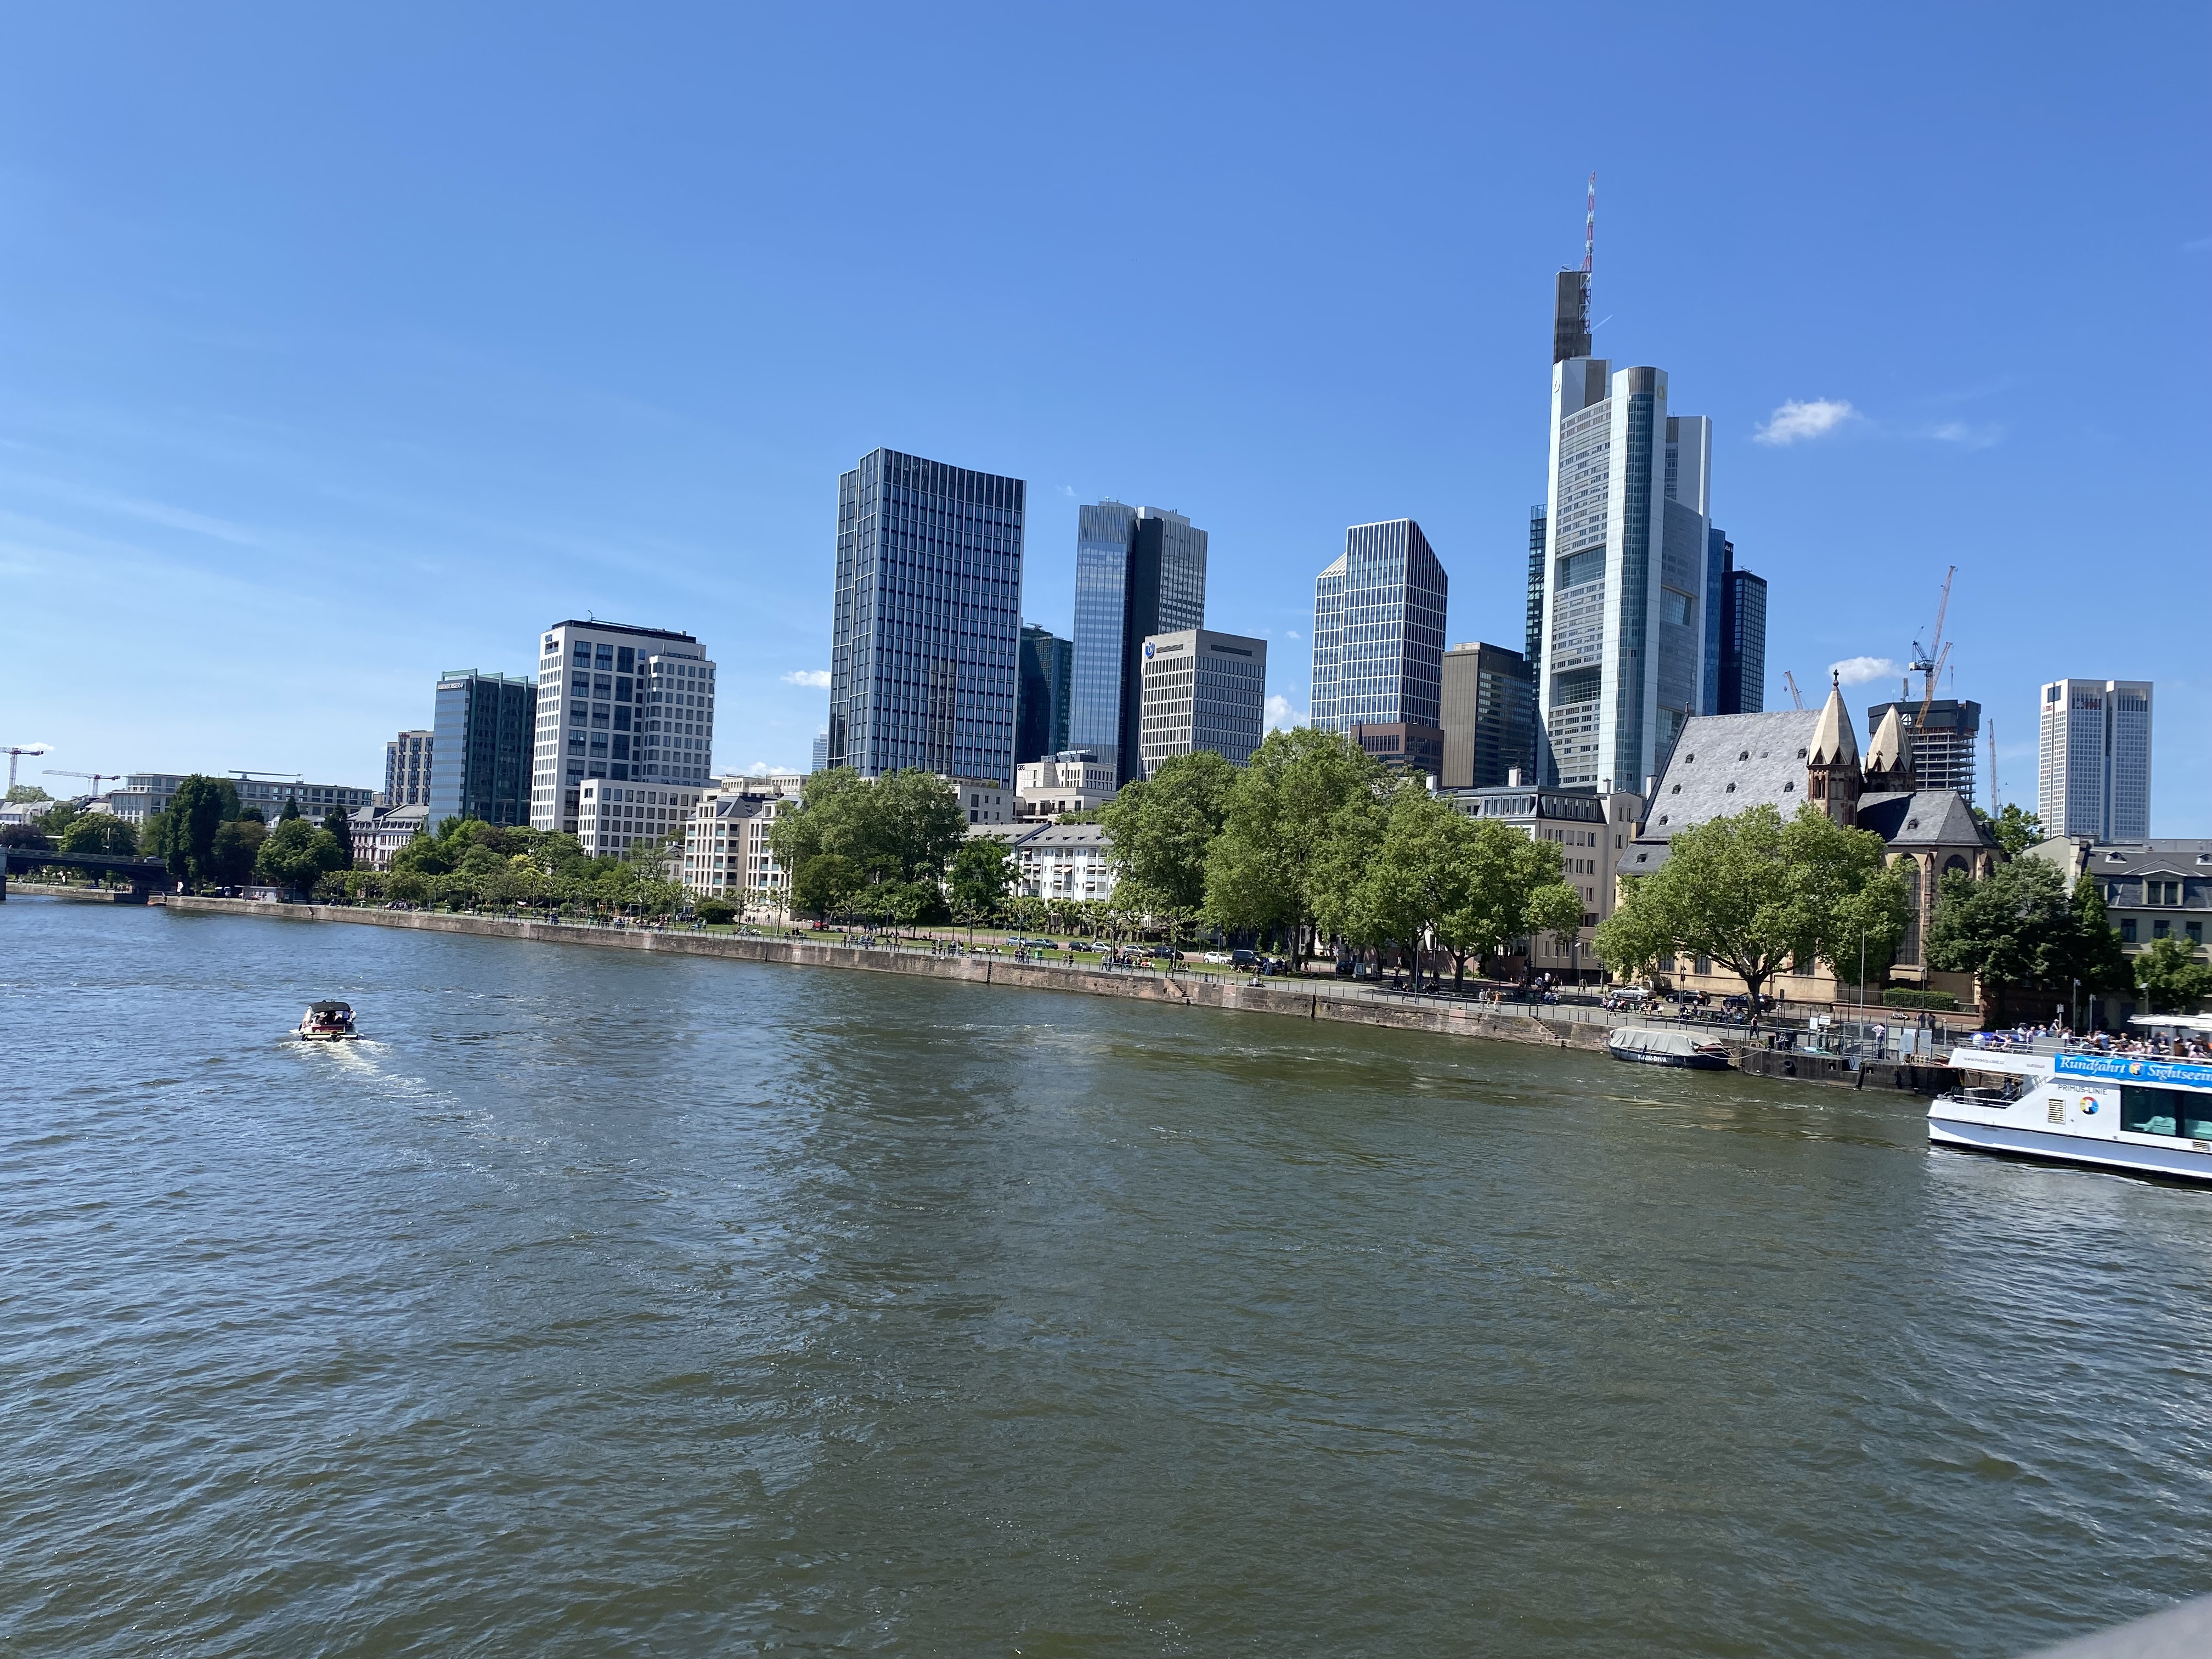 View over the "new" side of Frankfurt city while you cross the Main river.